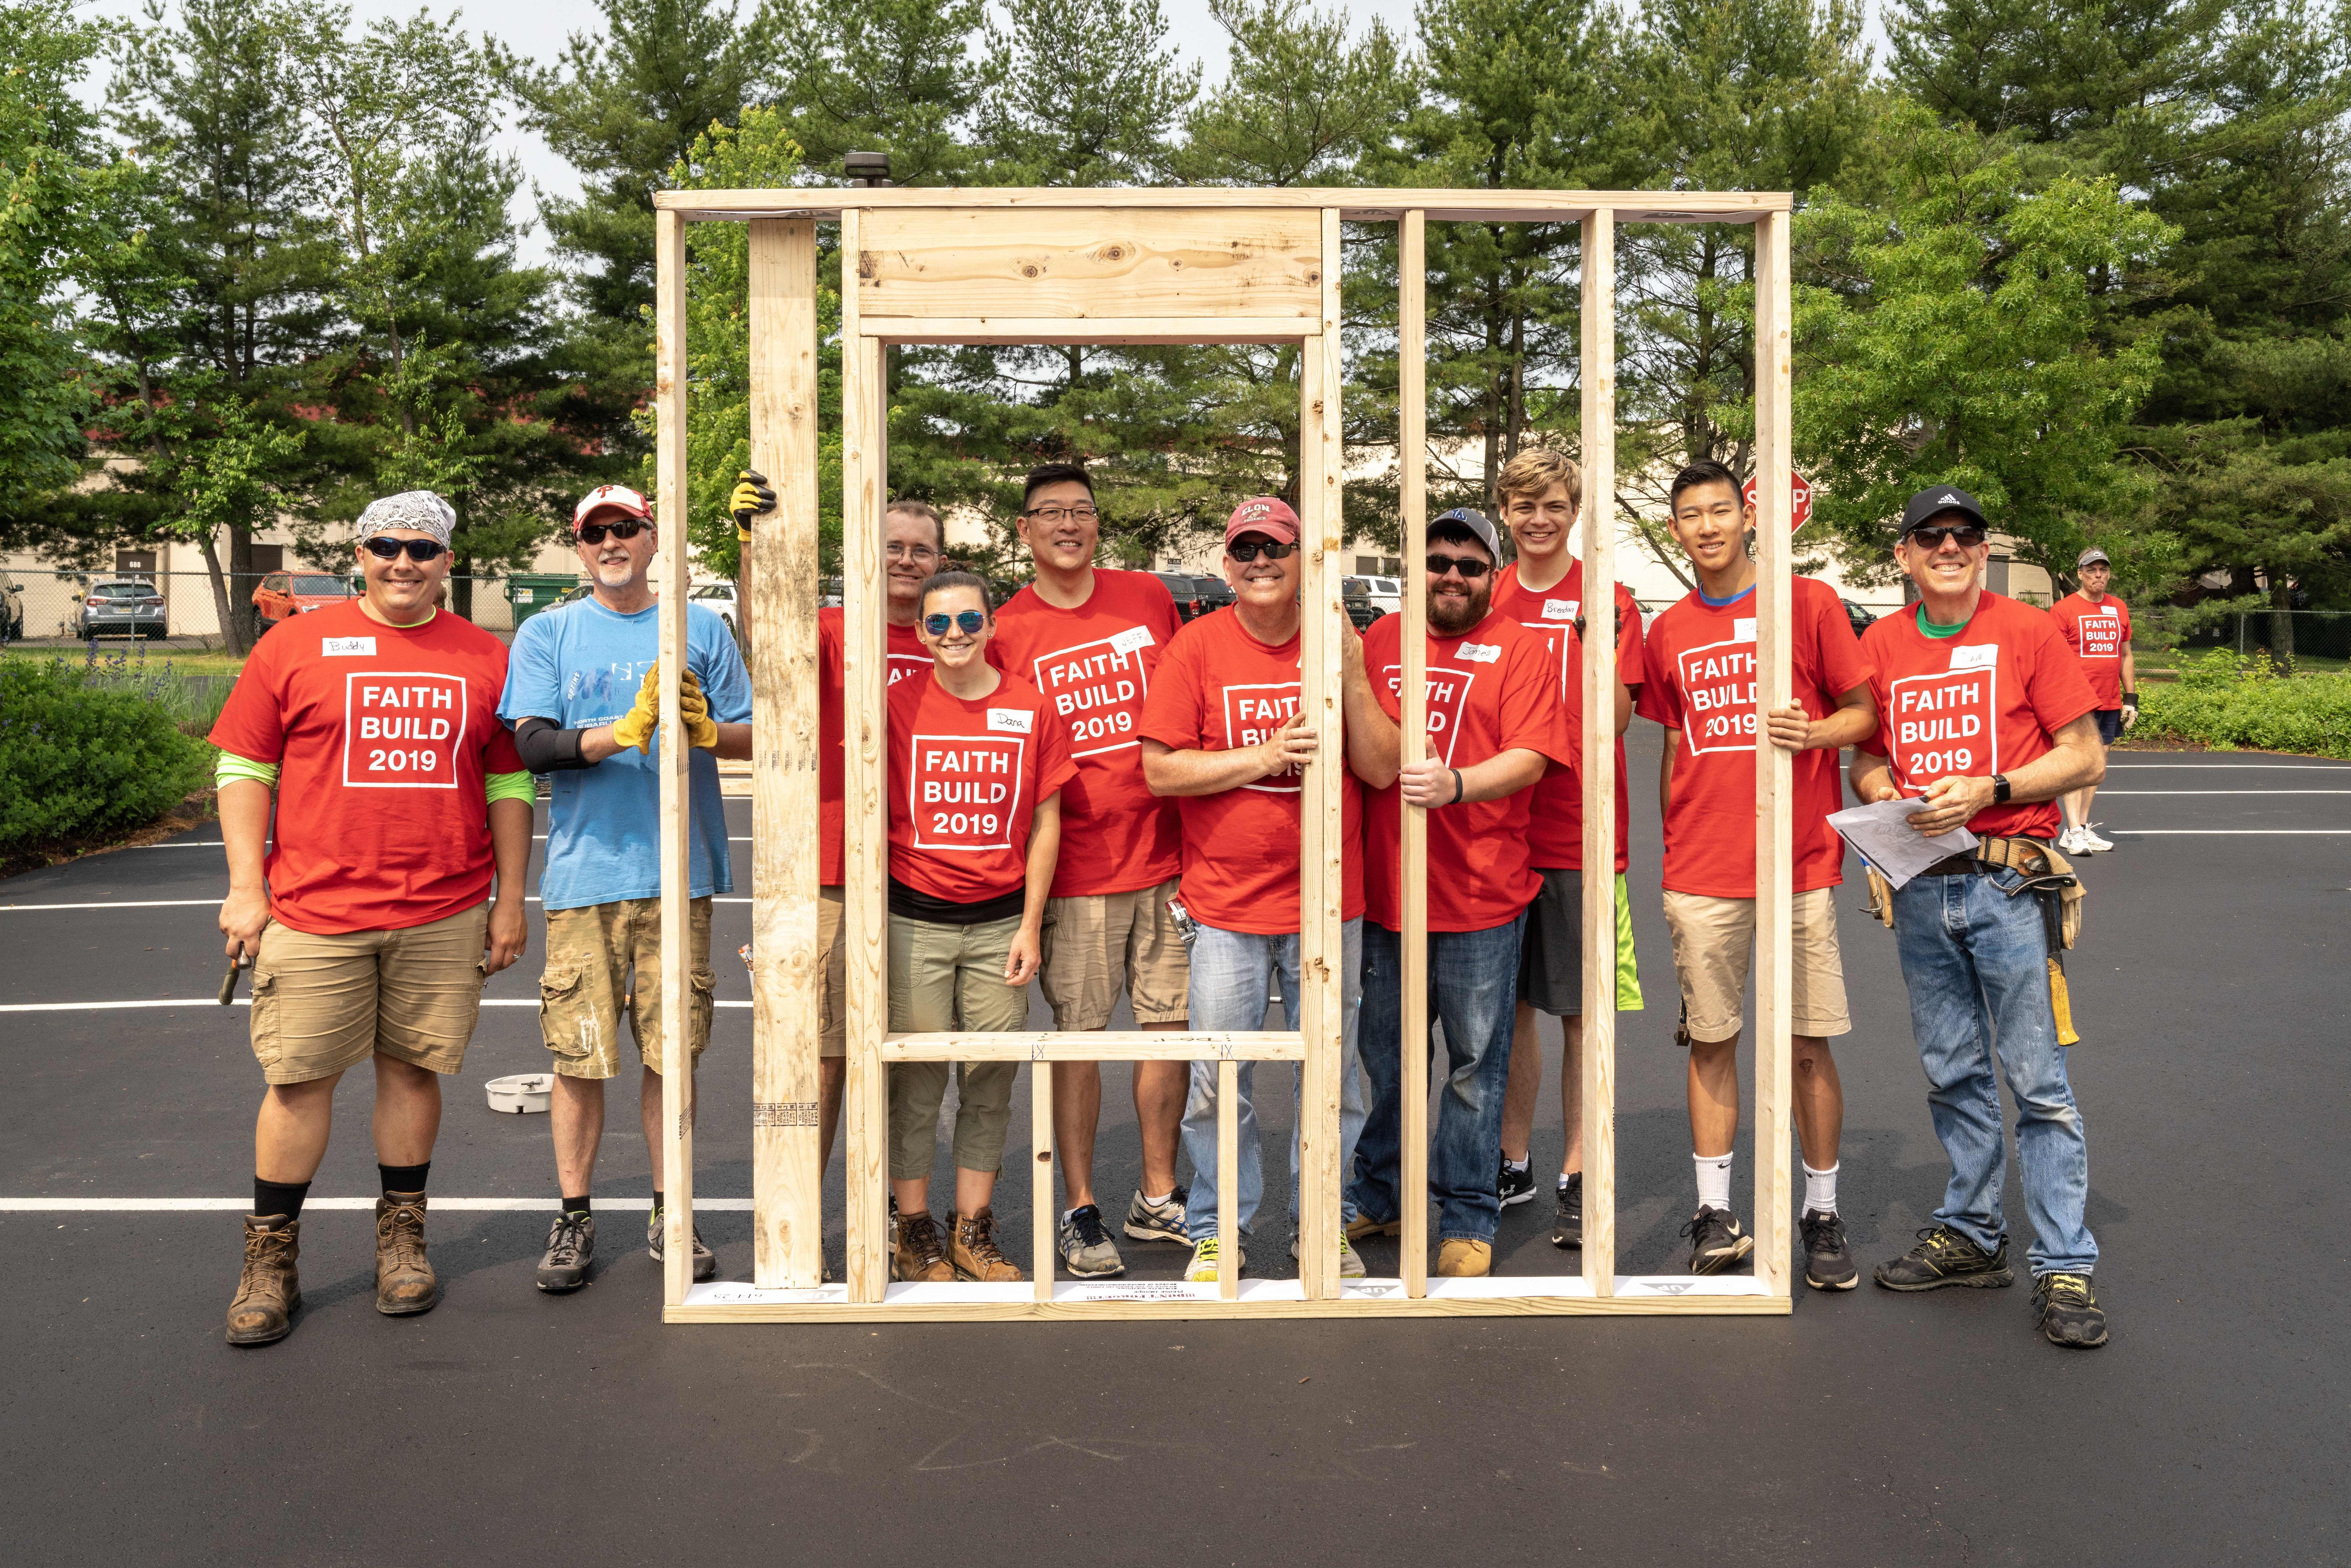 A group of faith based volunteers in red shirts that read "Faith Build 2010" gather together on a build site holding the framed wall of a Habitat house.